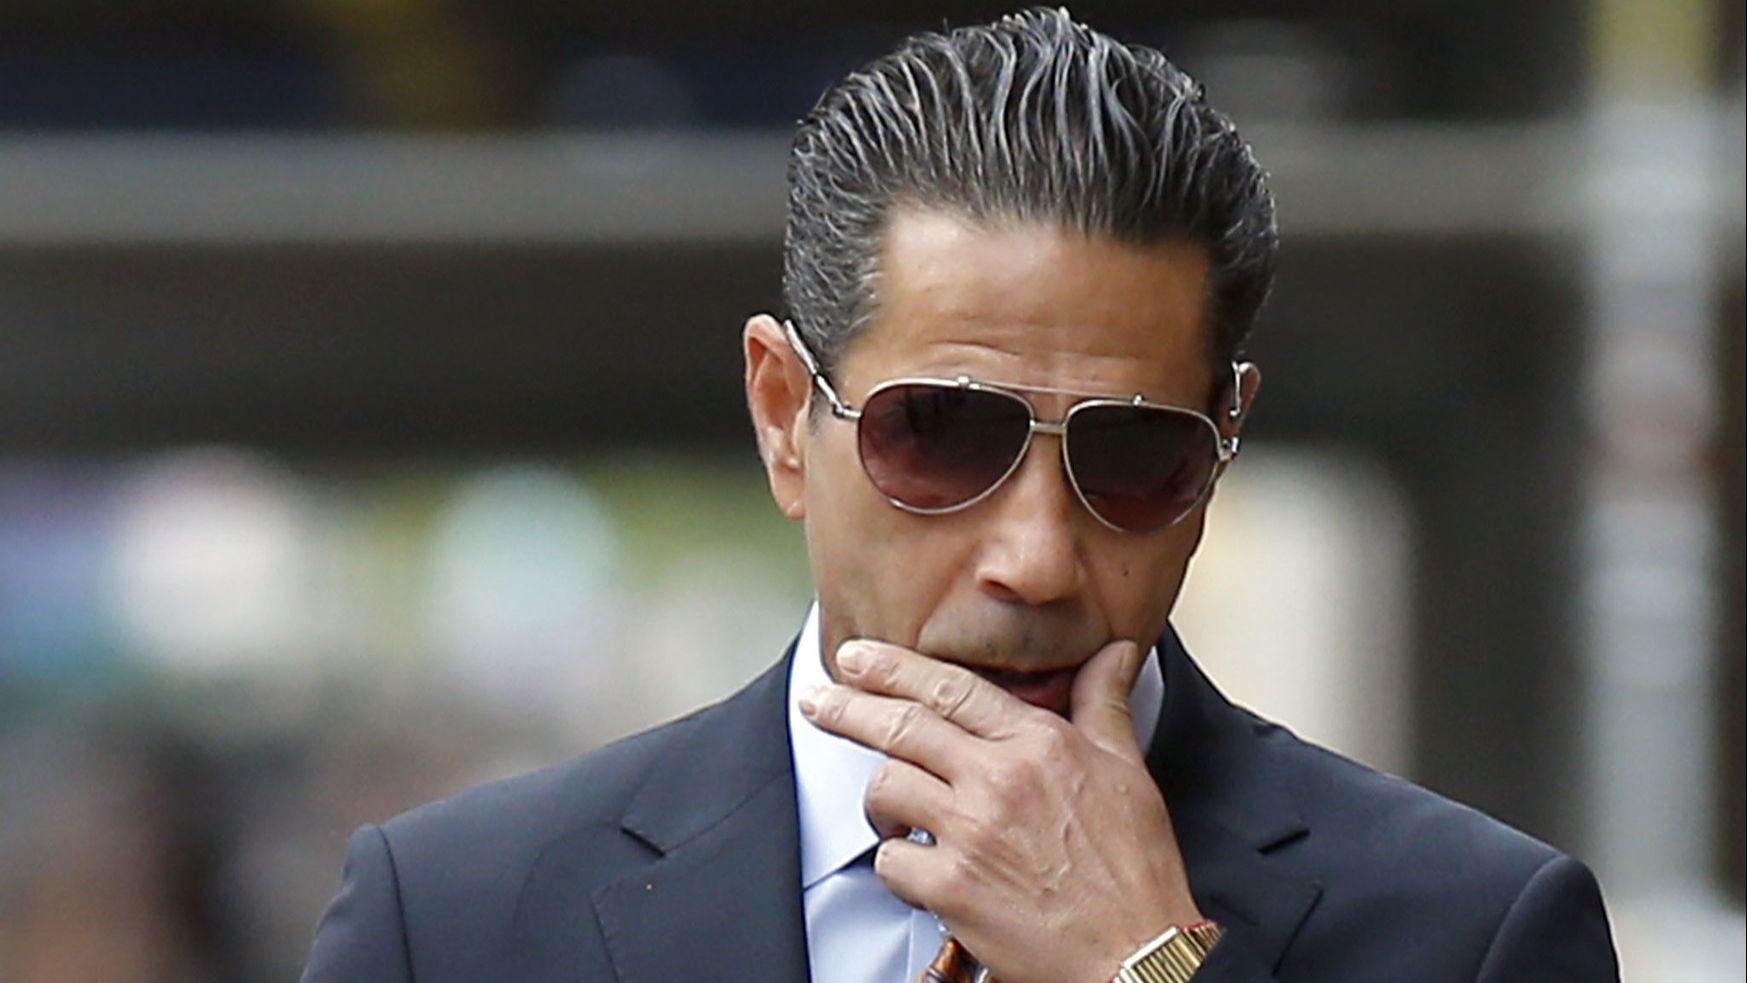 'Skinny Joey' Merlino, mob boss who moved to Boca Raton, gets 2 years in prison - Sun ...1747 x 983